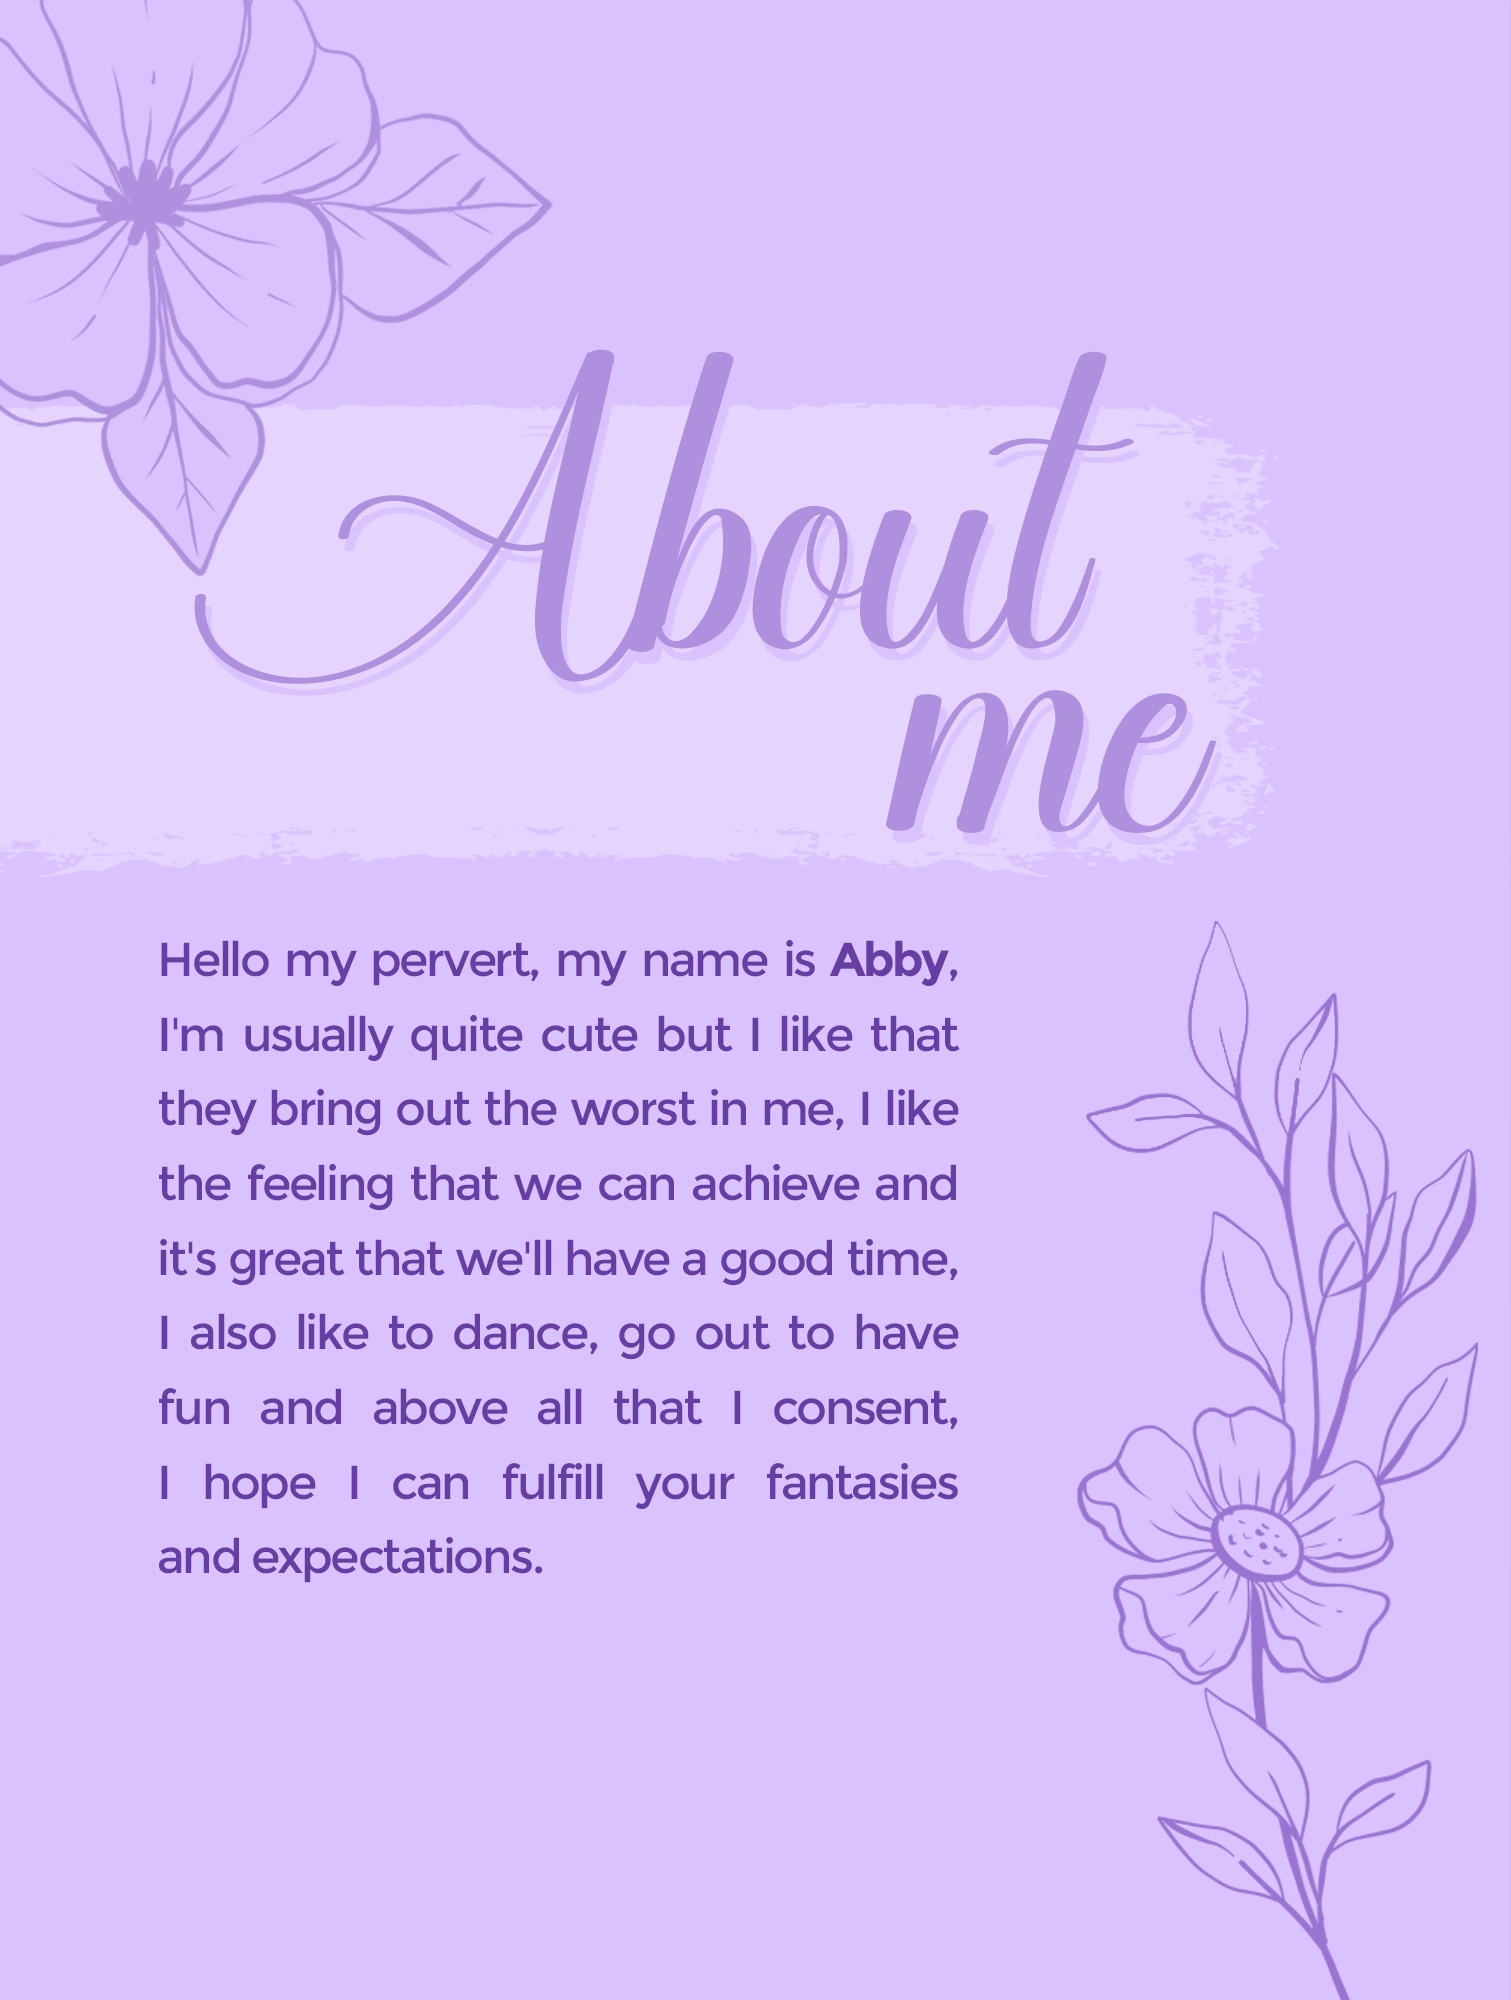 AbbyRoberts About me image: 1